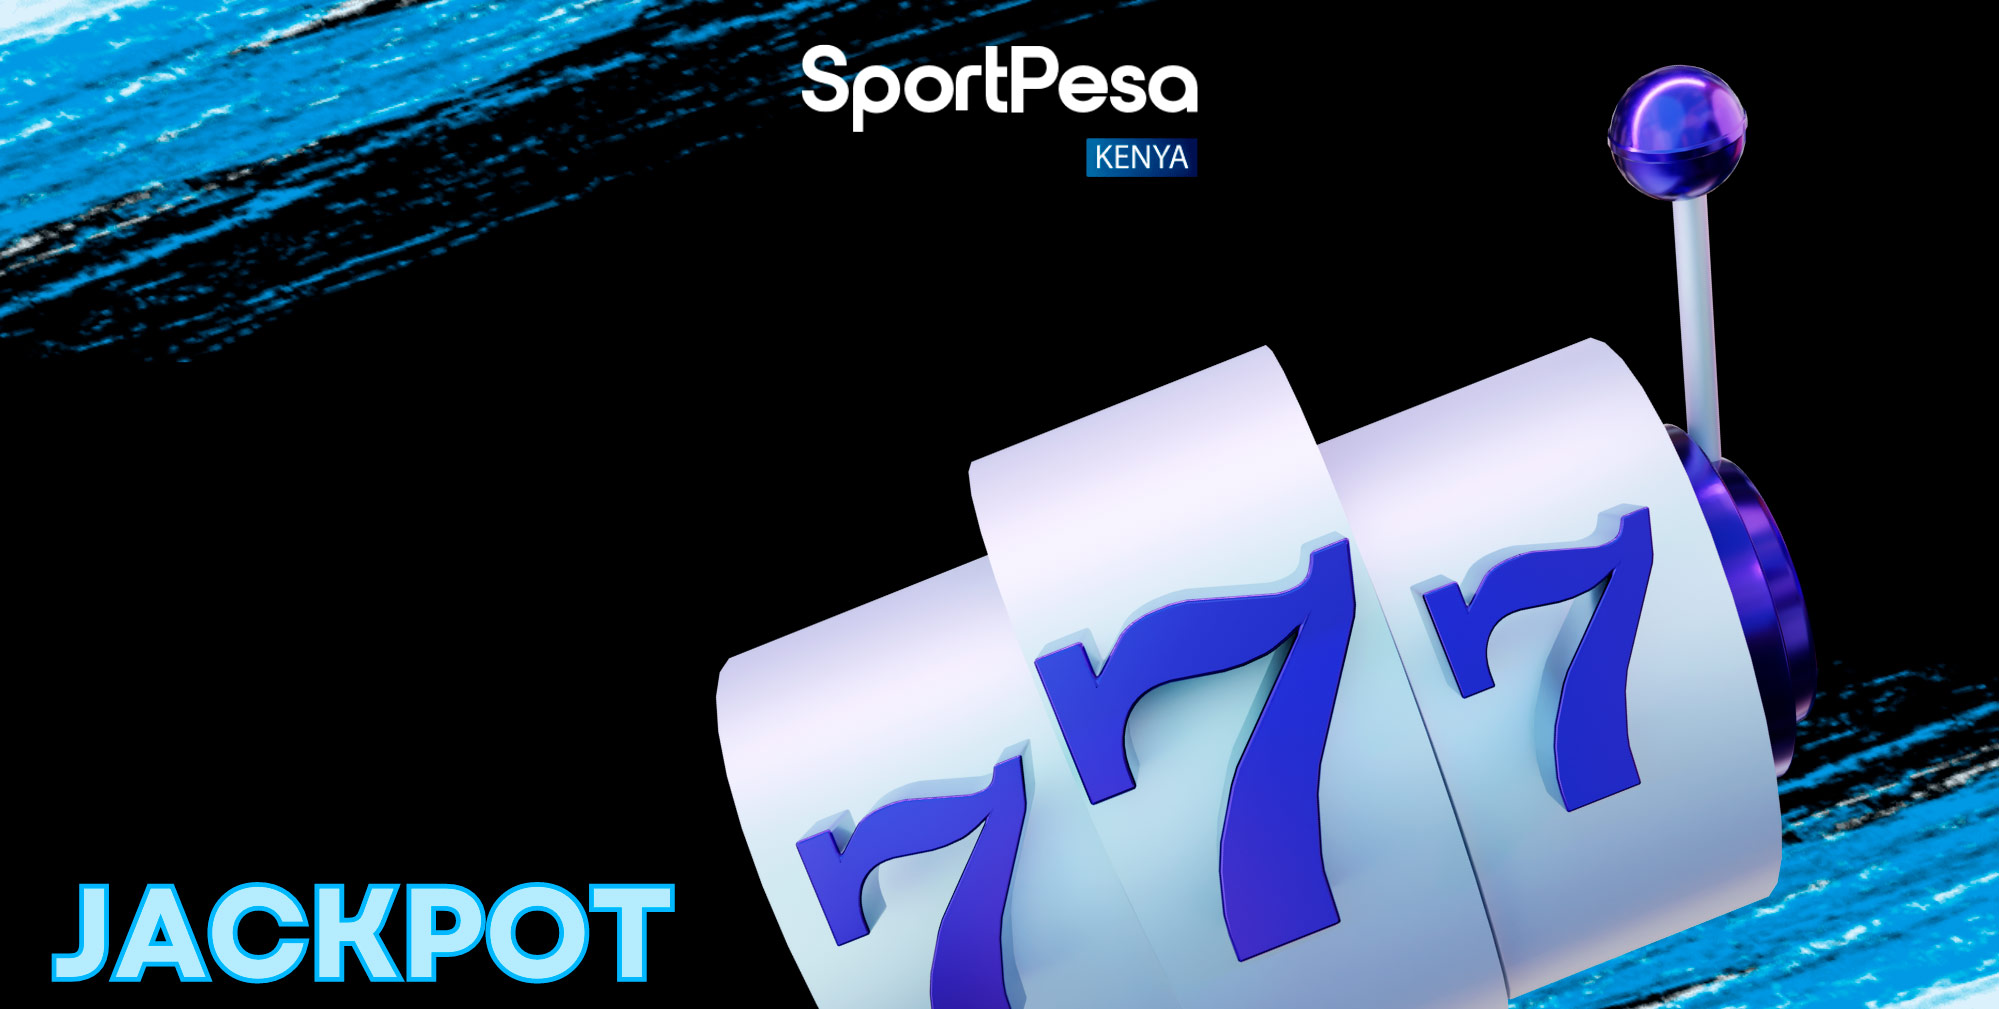 Sportpesa offers an exciting Jackpot section